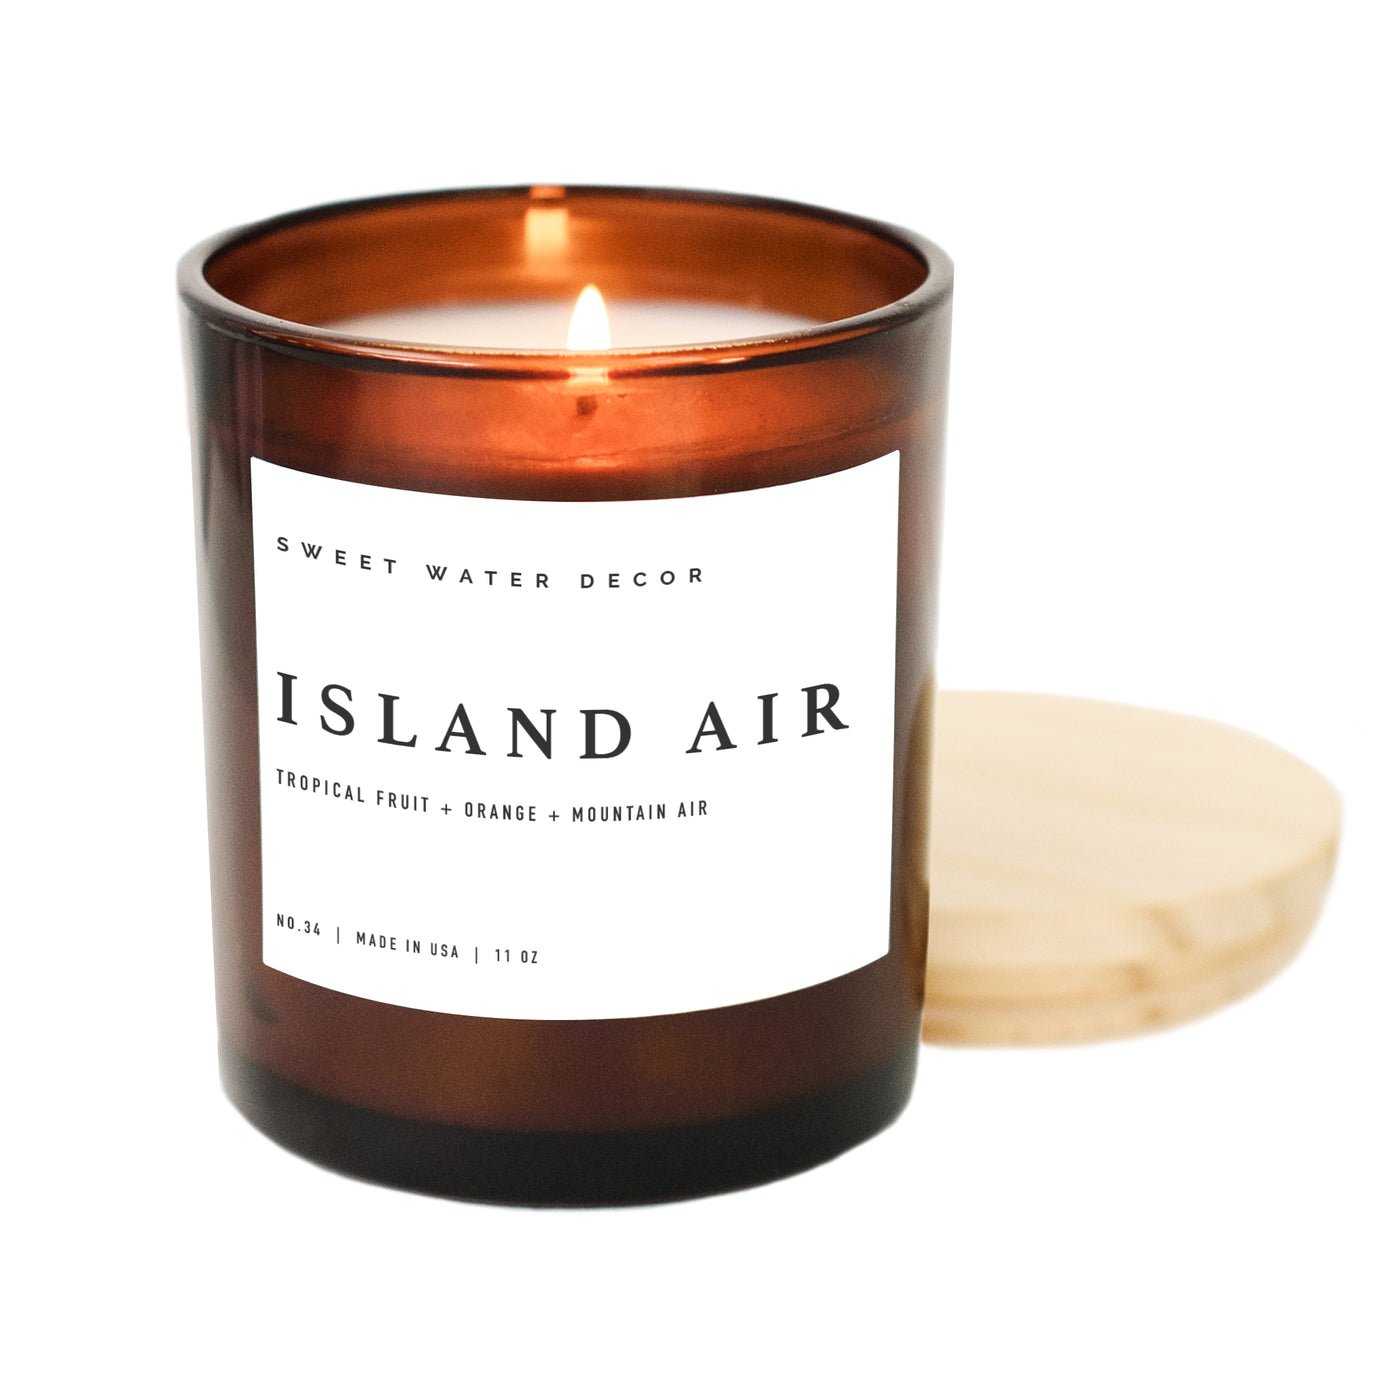 Island Air Soy Candle - Amber Jar - 11 oz - Sweet Water Decor - Candles